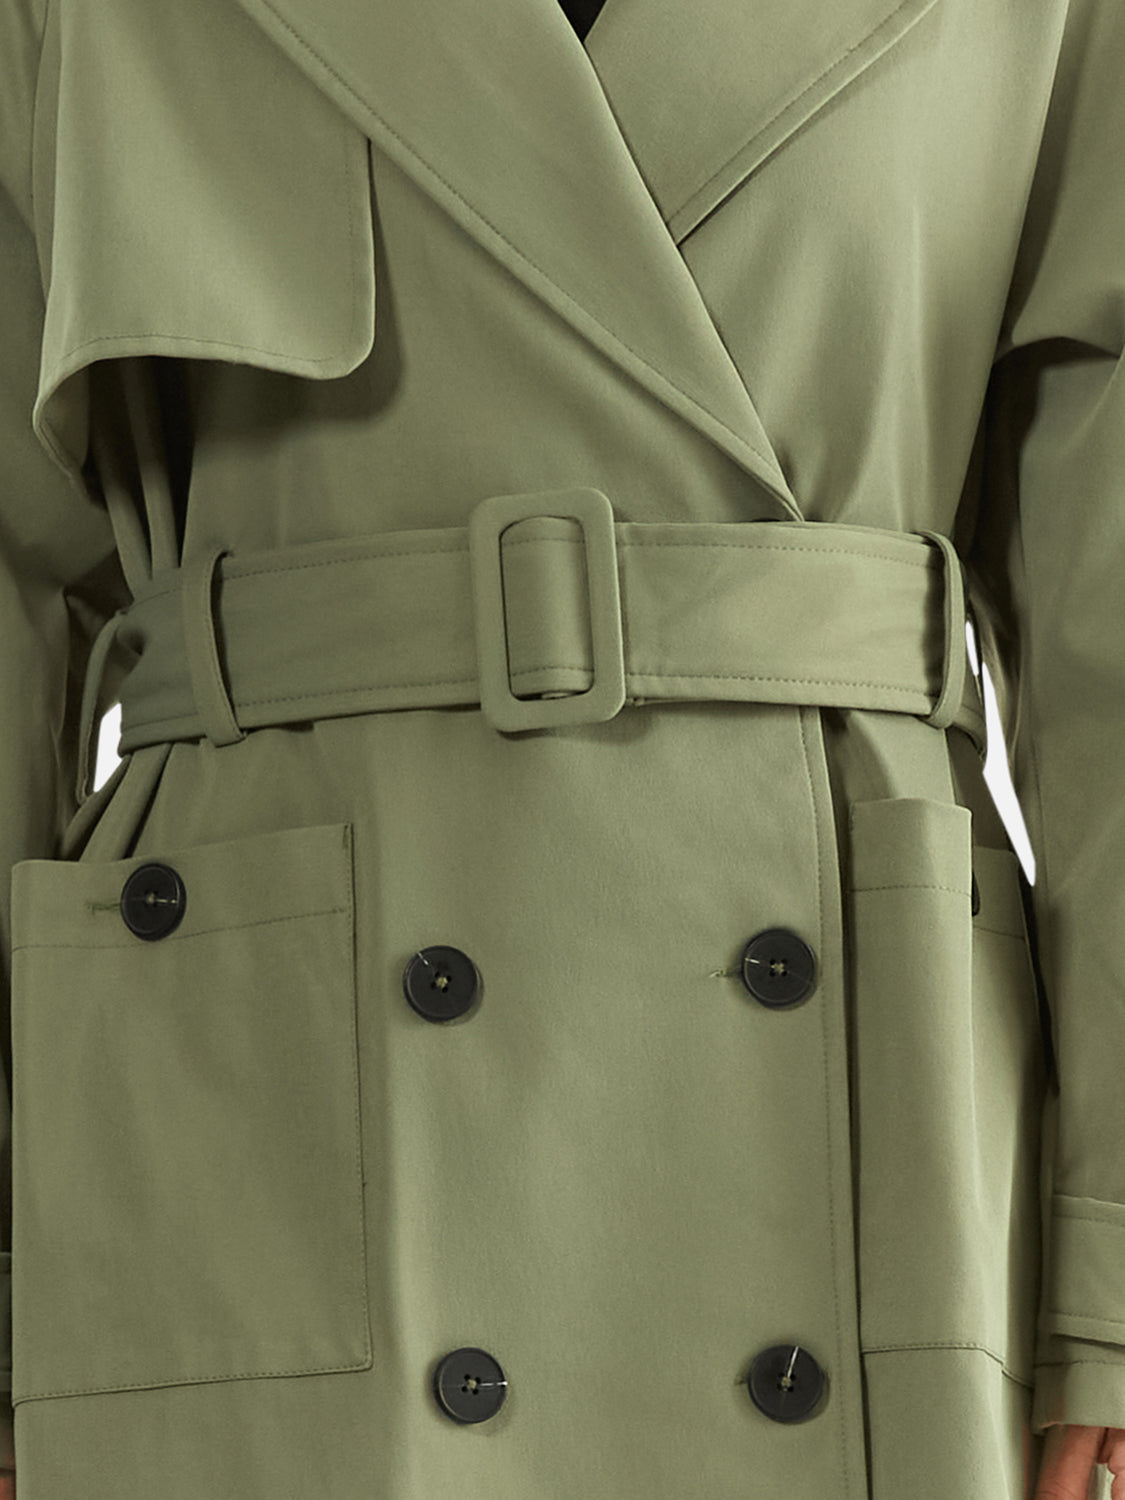 Carrie Trench Coat - Forest